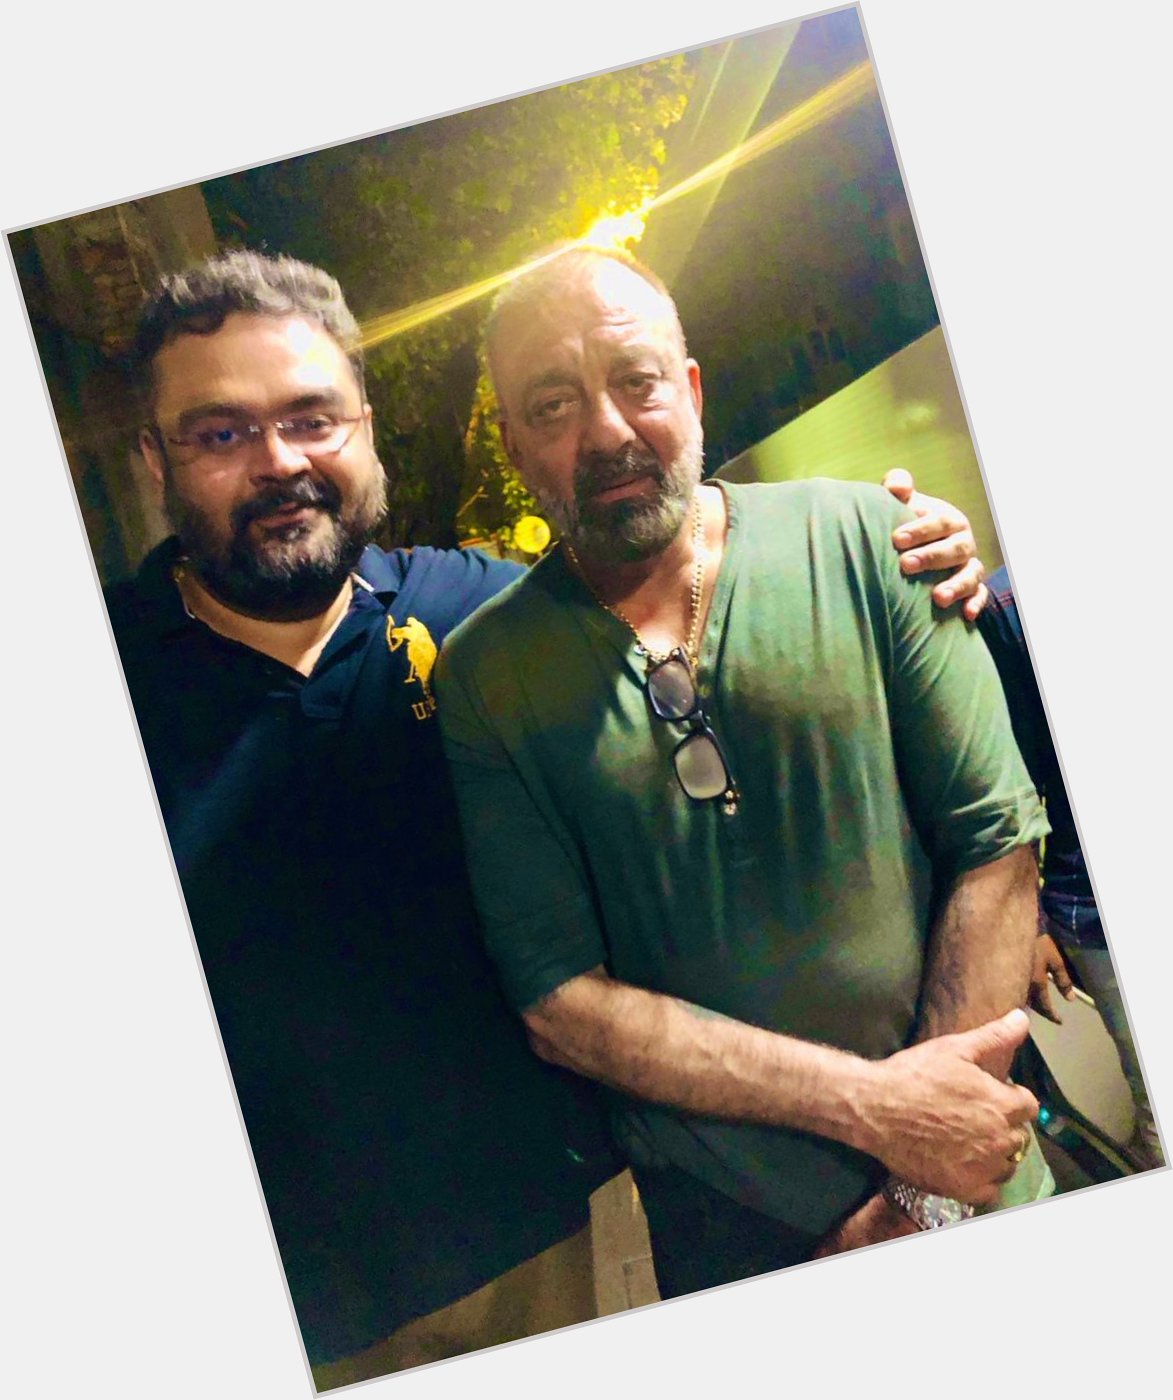 Happy birthday Mr Sanjay Dutt !! 

Live long !! Extra strong !! Ting tong !!          